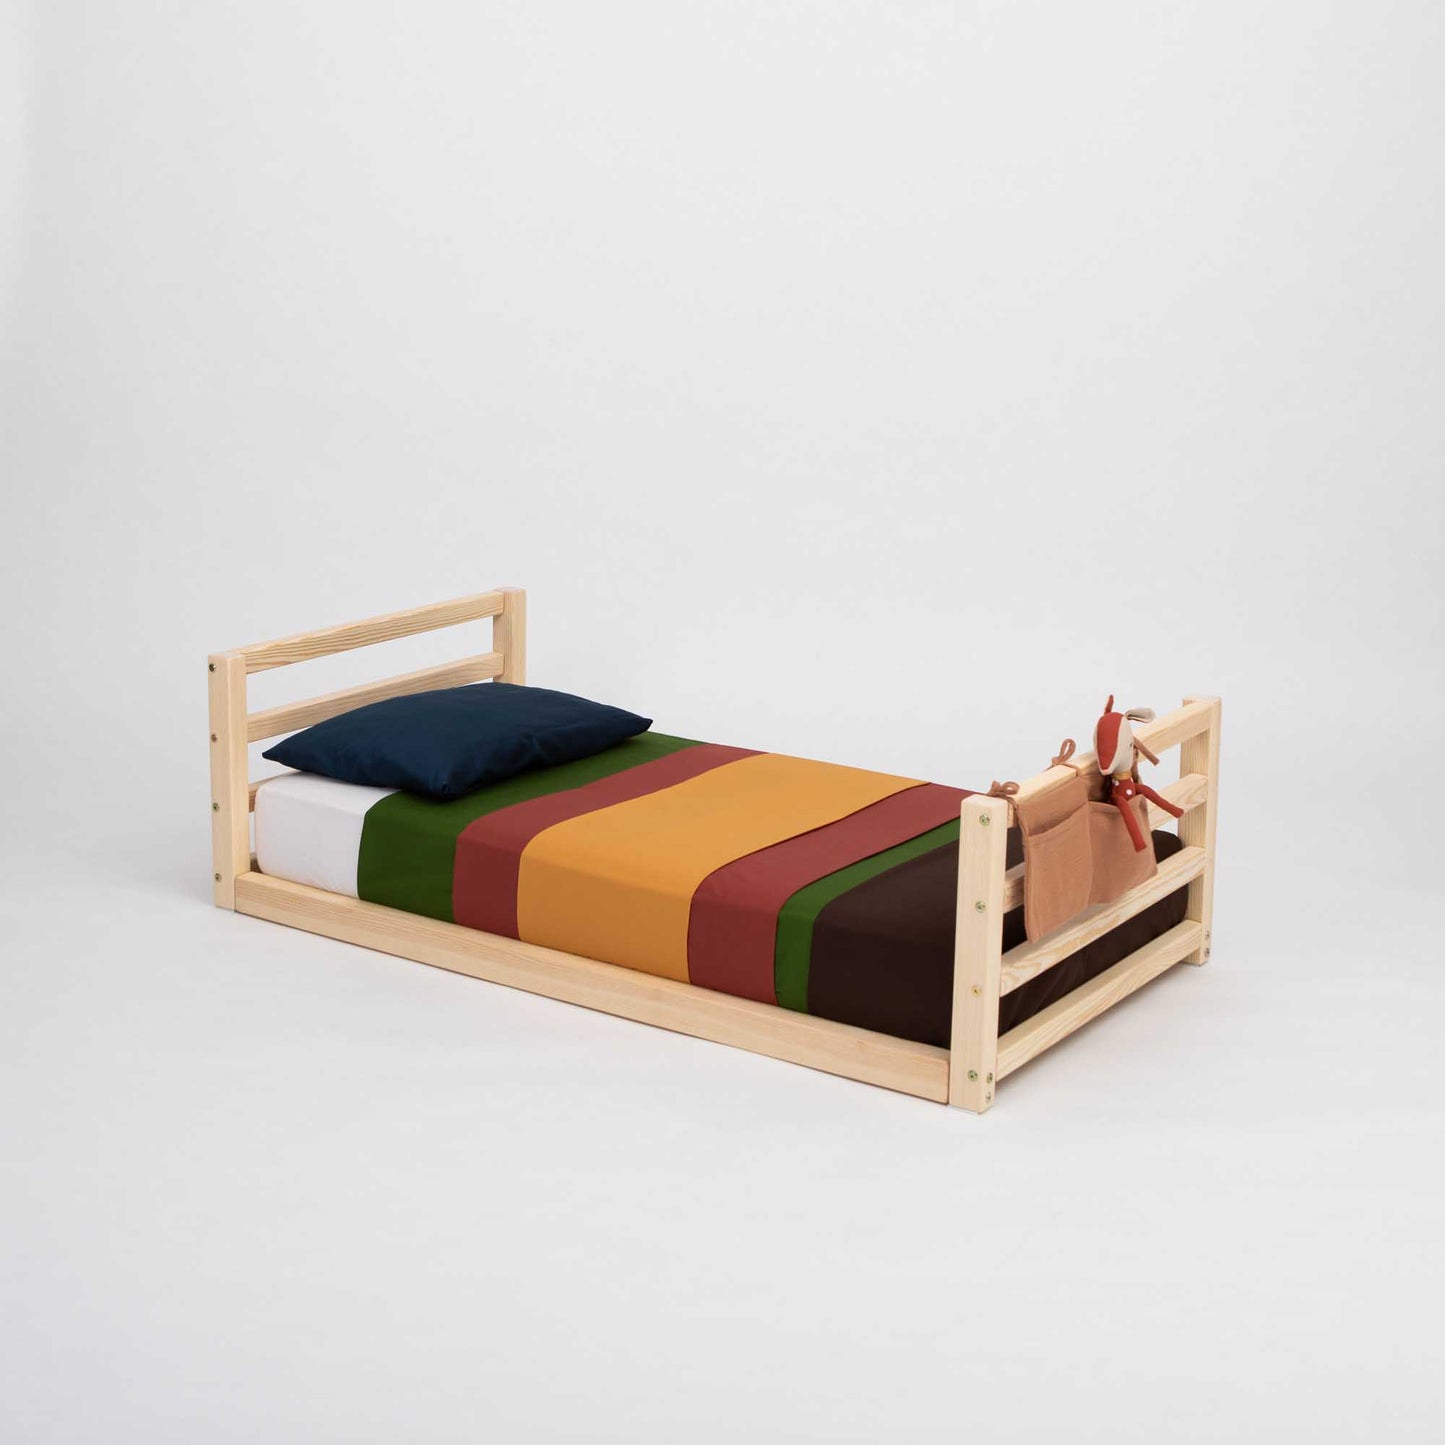 A Sweet Home From Wood Toddler floor bed with a horizontal rail headboard and footboard, with a colorful striped blanket for kids.